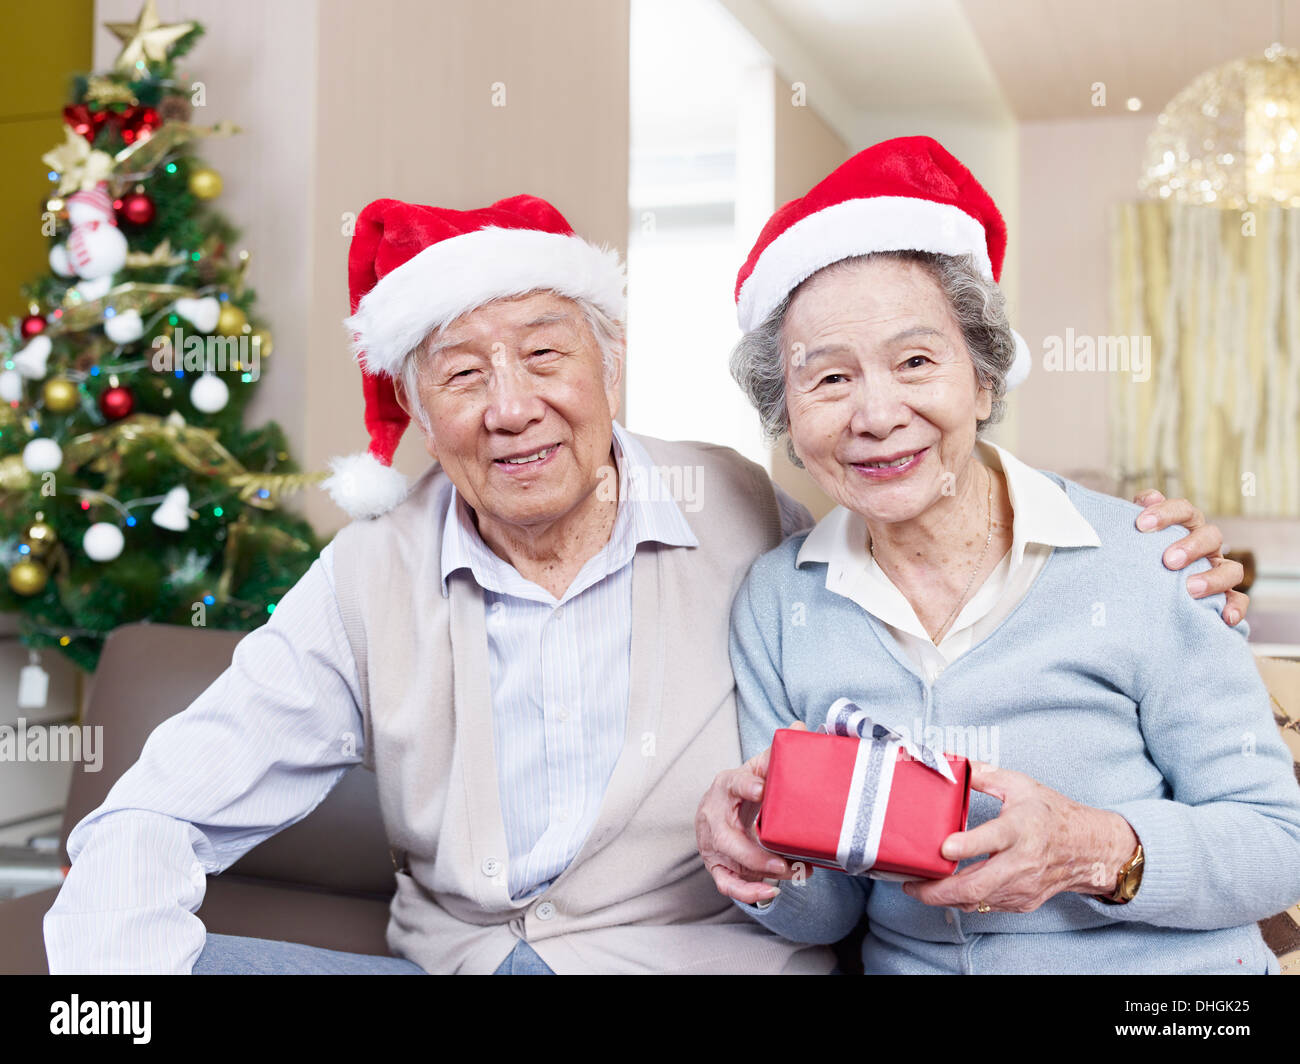 Portrait of an Asian senior couple with Christmas hats and gifts. Stock Photo